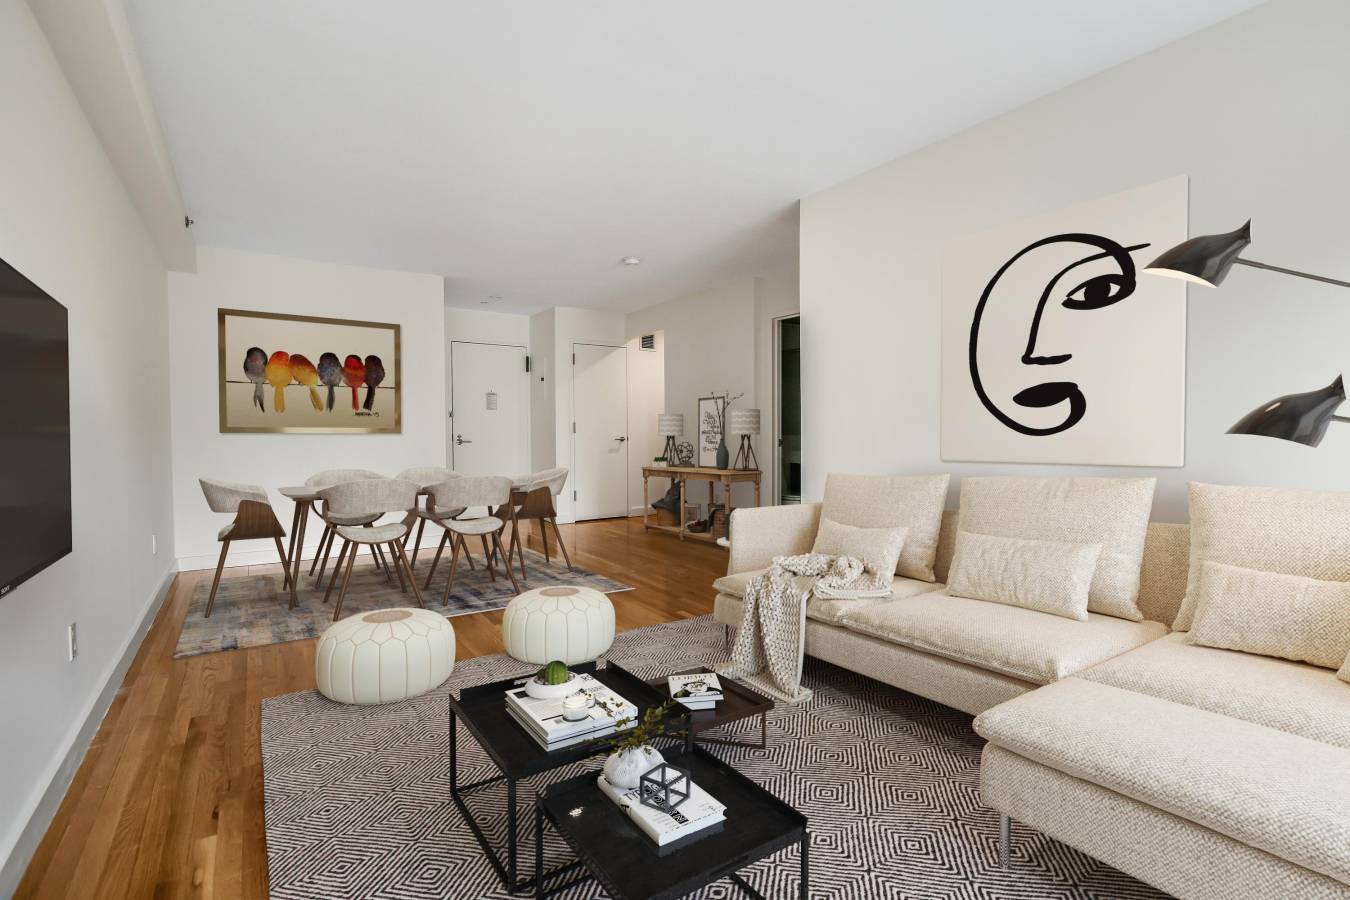 STUNNING 1 BED/1 BATH LUXURY APARTMENT IN CHELSEA FEATURING A PRIVATE BALCONY